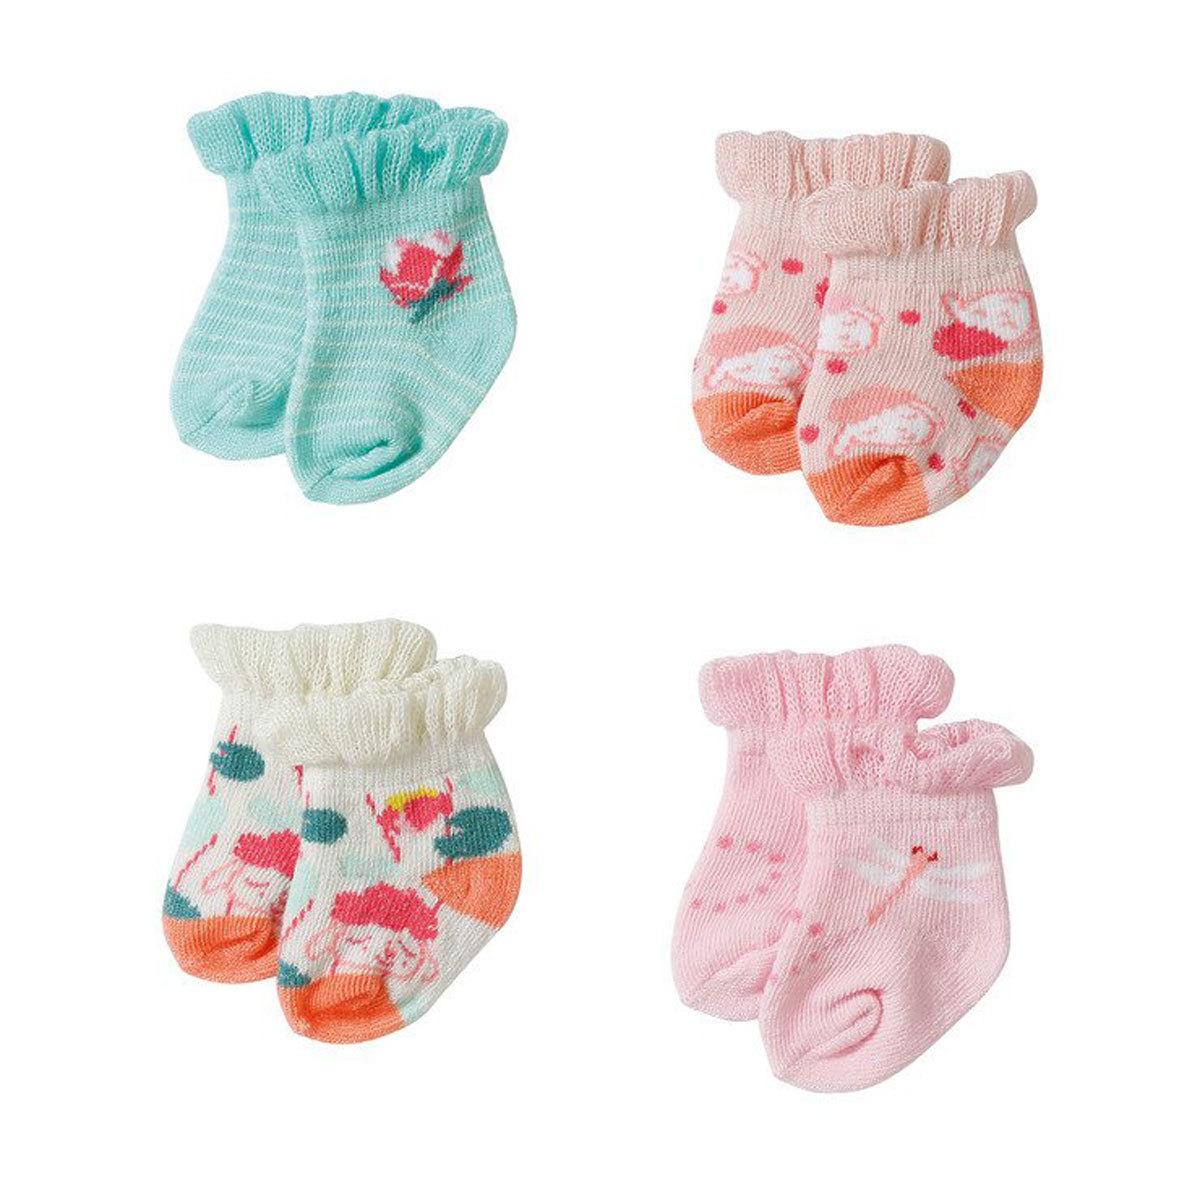 39-46 CM NEW BABY ANNABELL 2 PACK SOCKS STYLES VARY ZAPF CREATIONS 3 